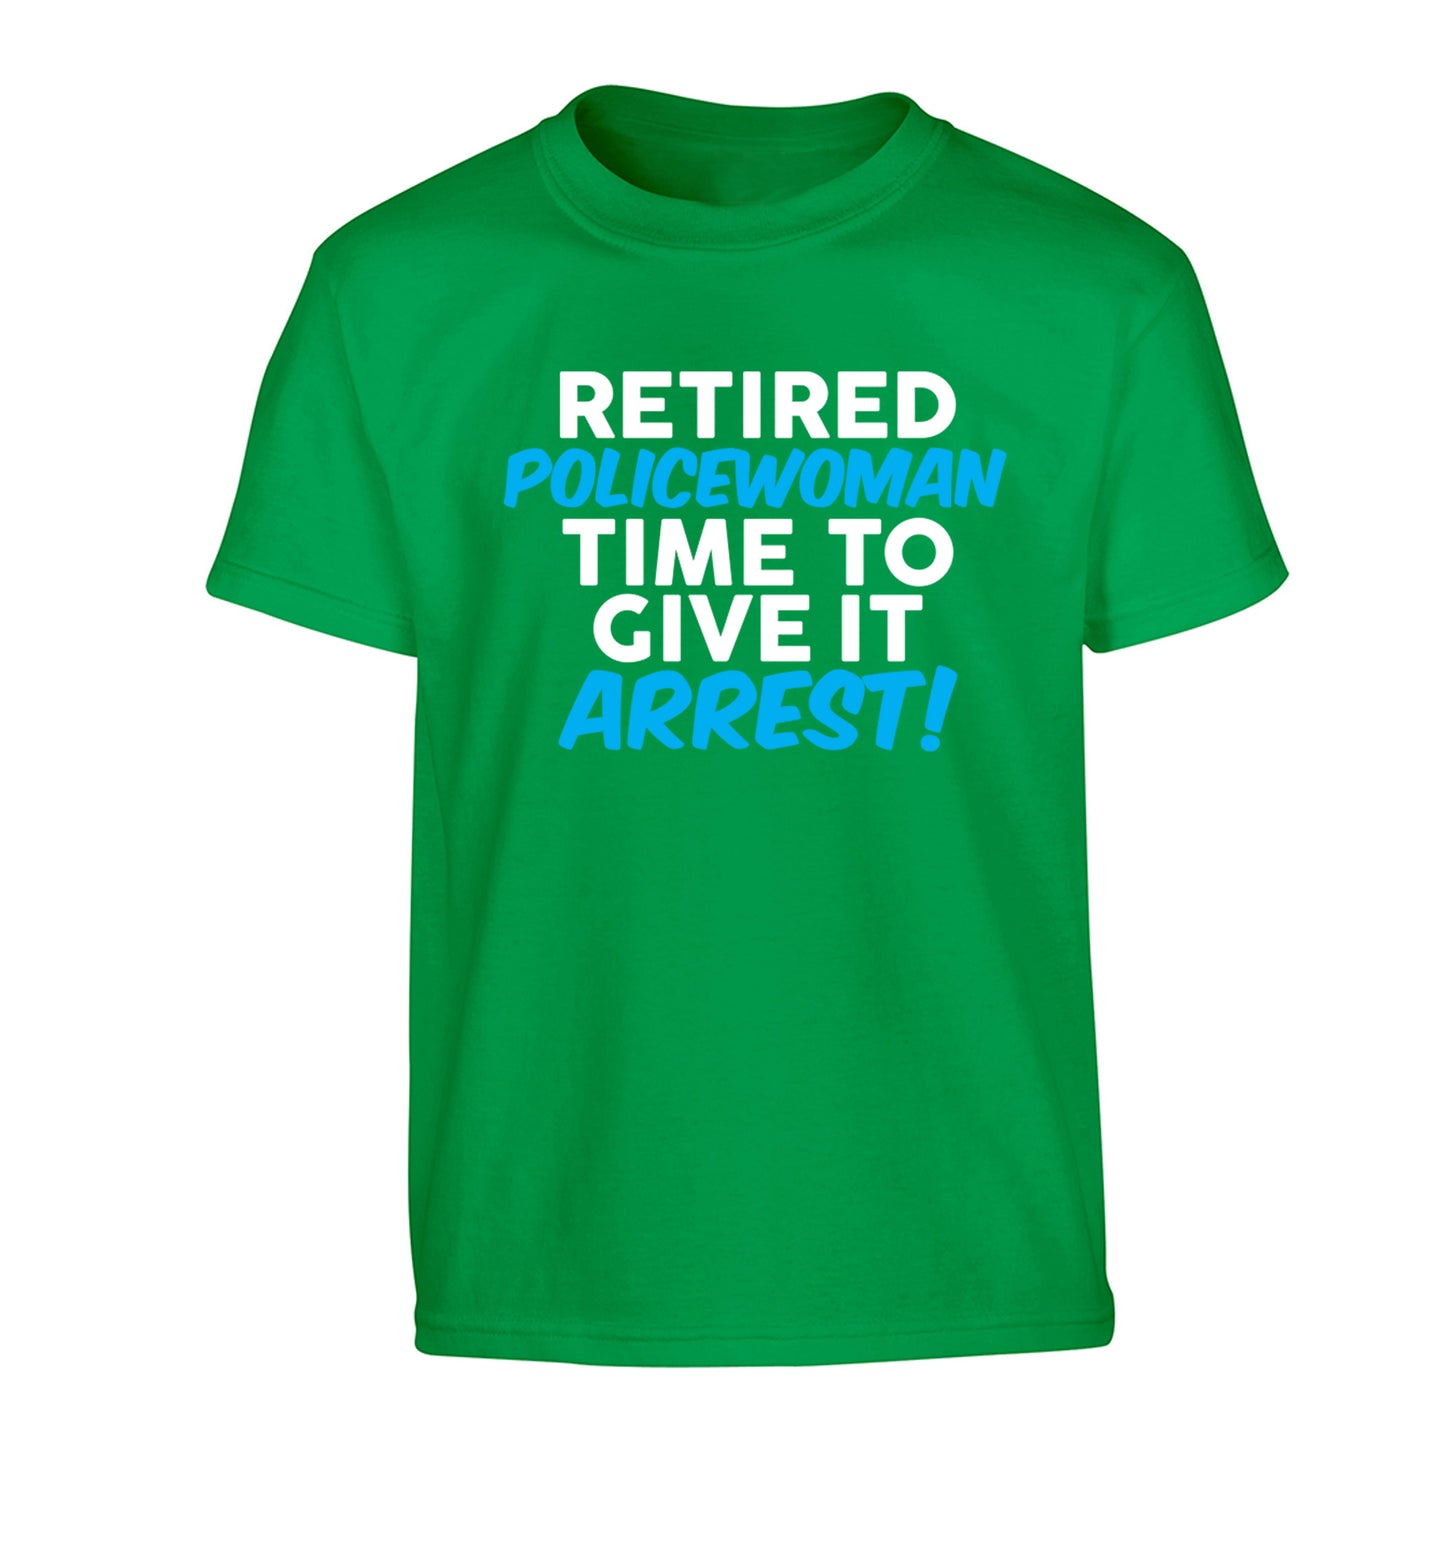 Retired policewoman time to give it arrest Children's green Tshirt 12-13 Years